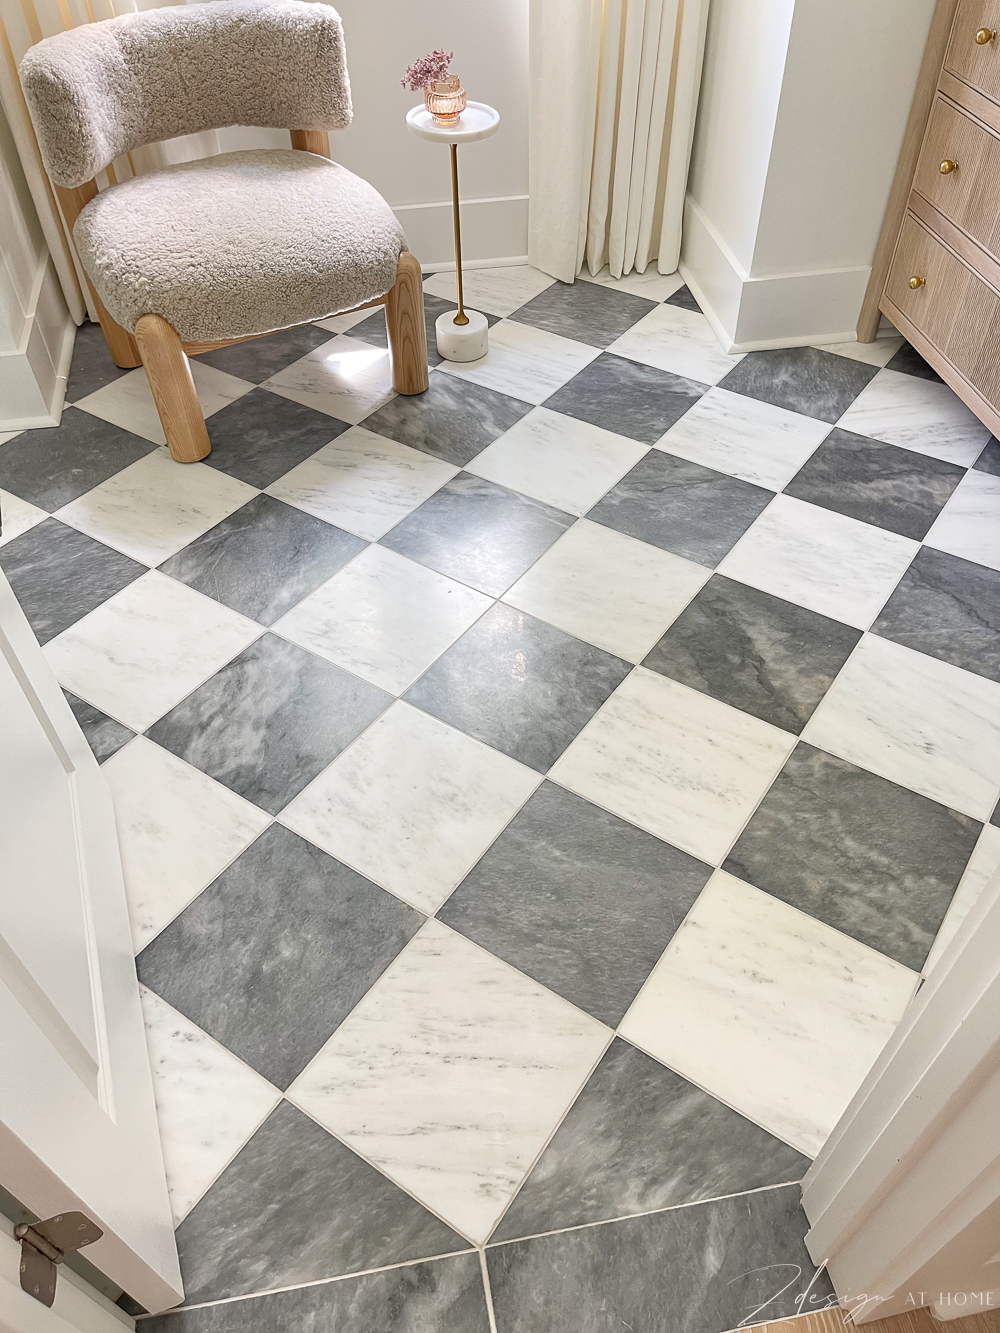 honed gray bardiglio marble and bianco carrara marble tile floor in checkered / harlequin pattern 